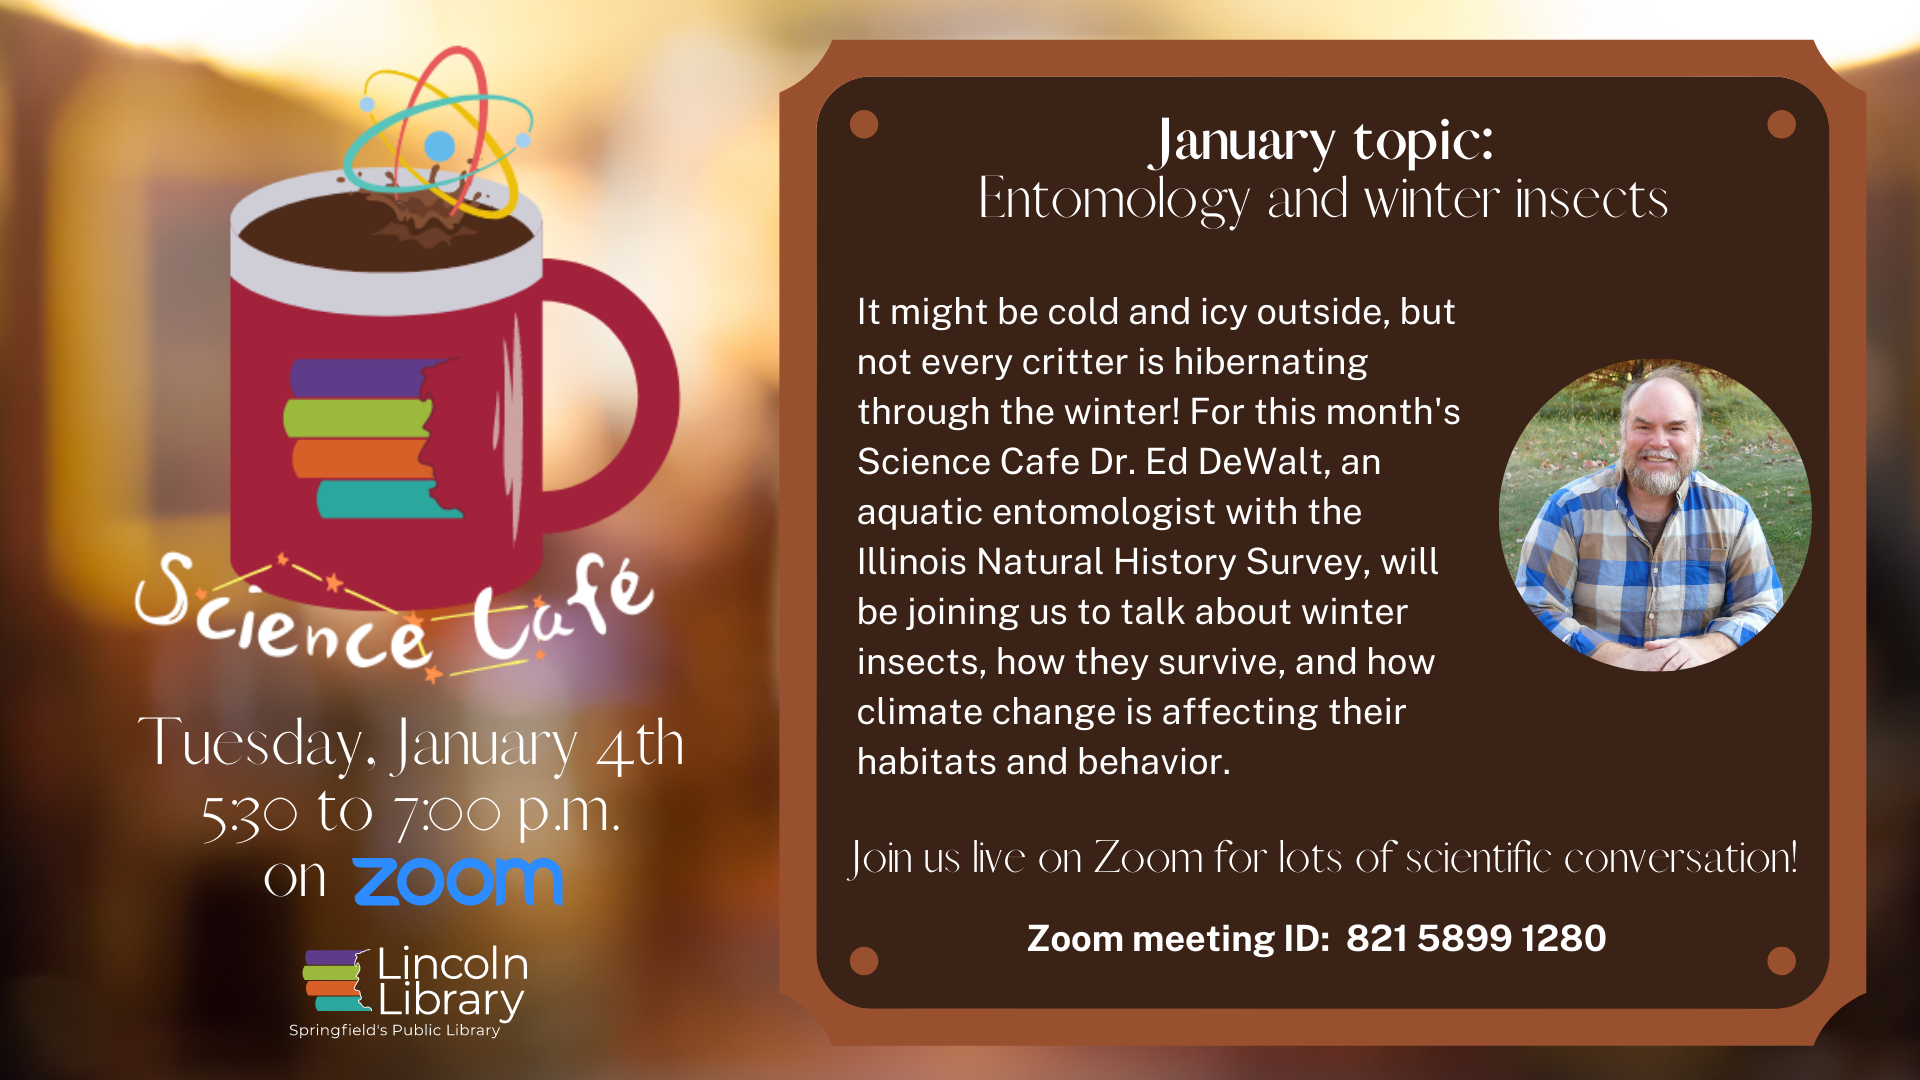 Program flyer for January Science Cafe, to be held on Tuesday, January 4th from 5:30 to 7:00 on Zoom